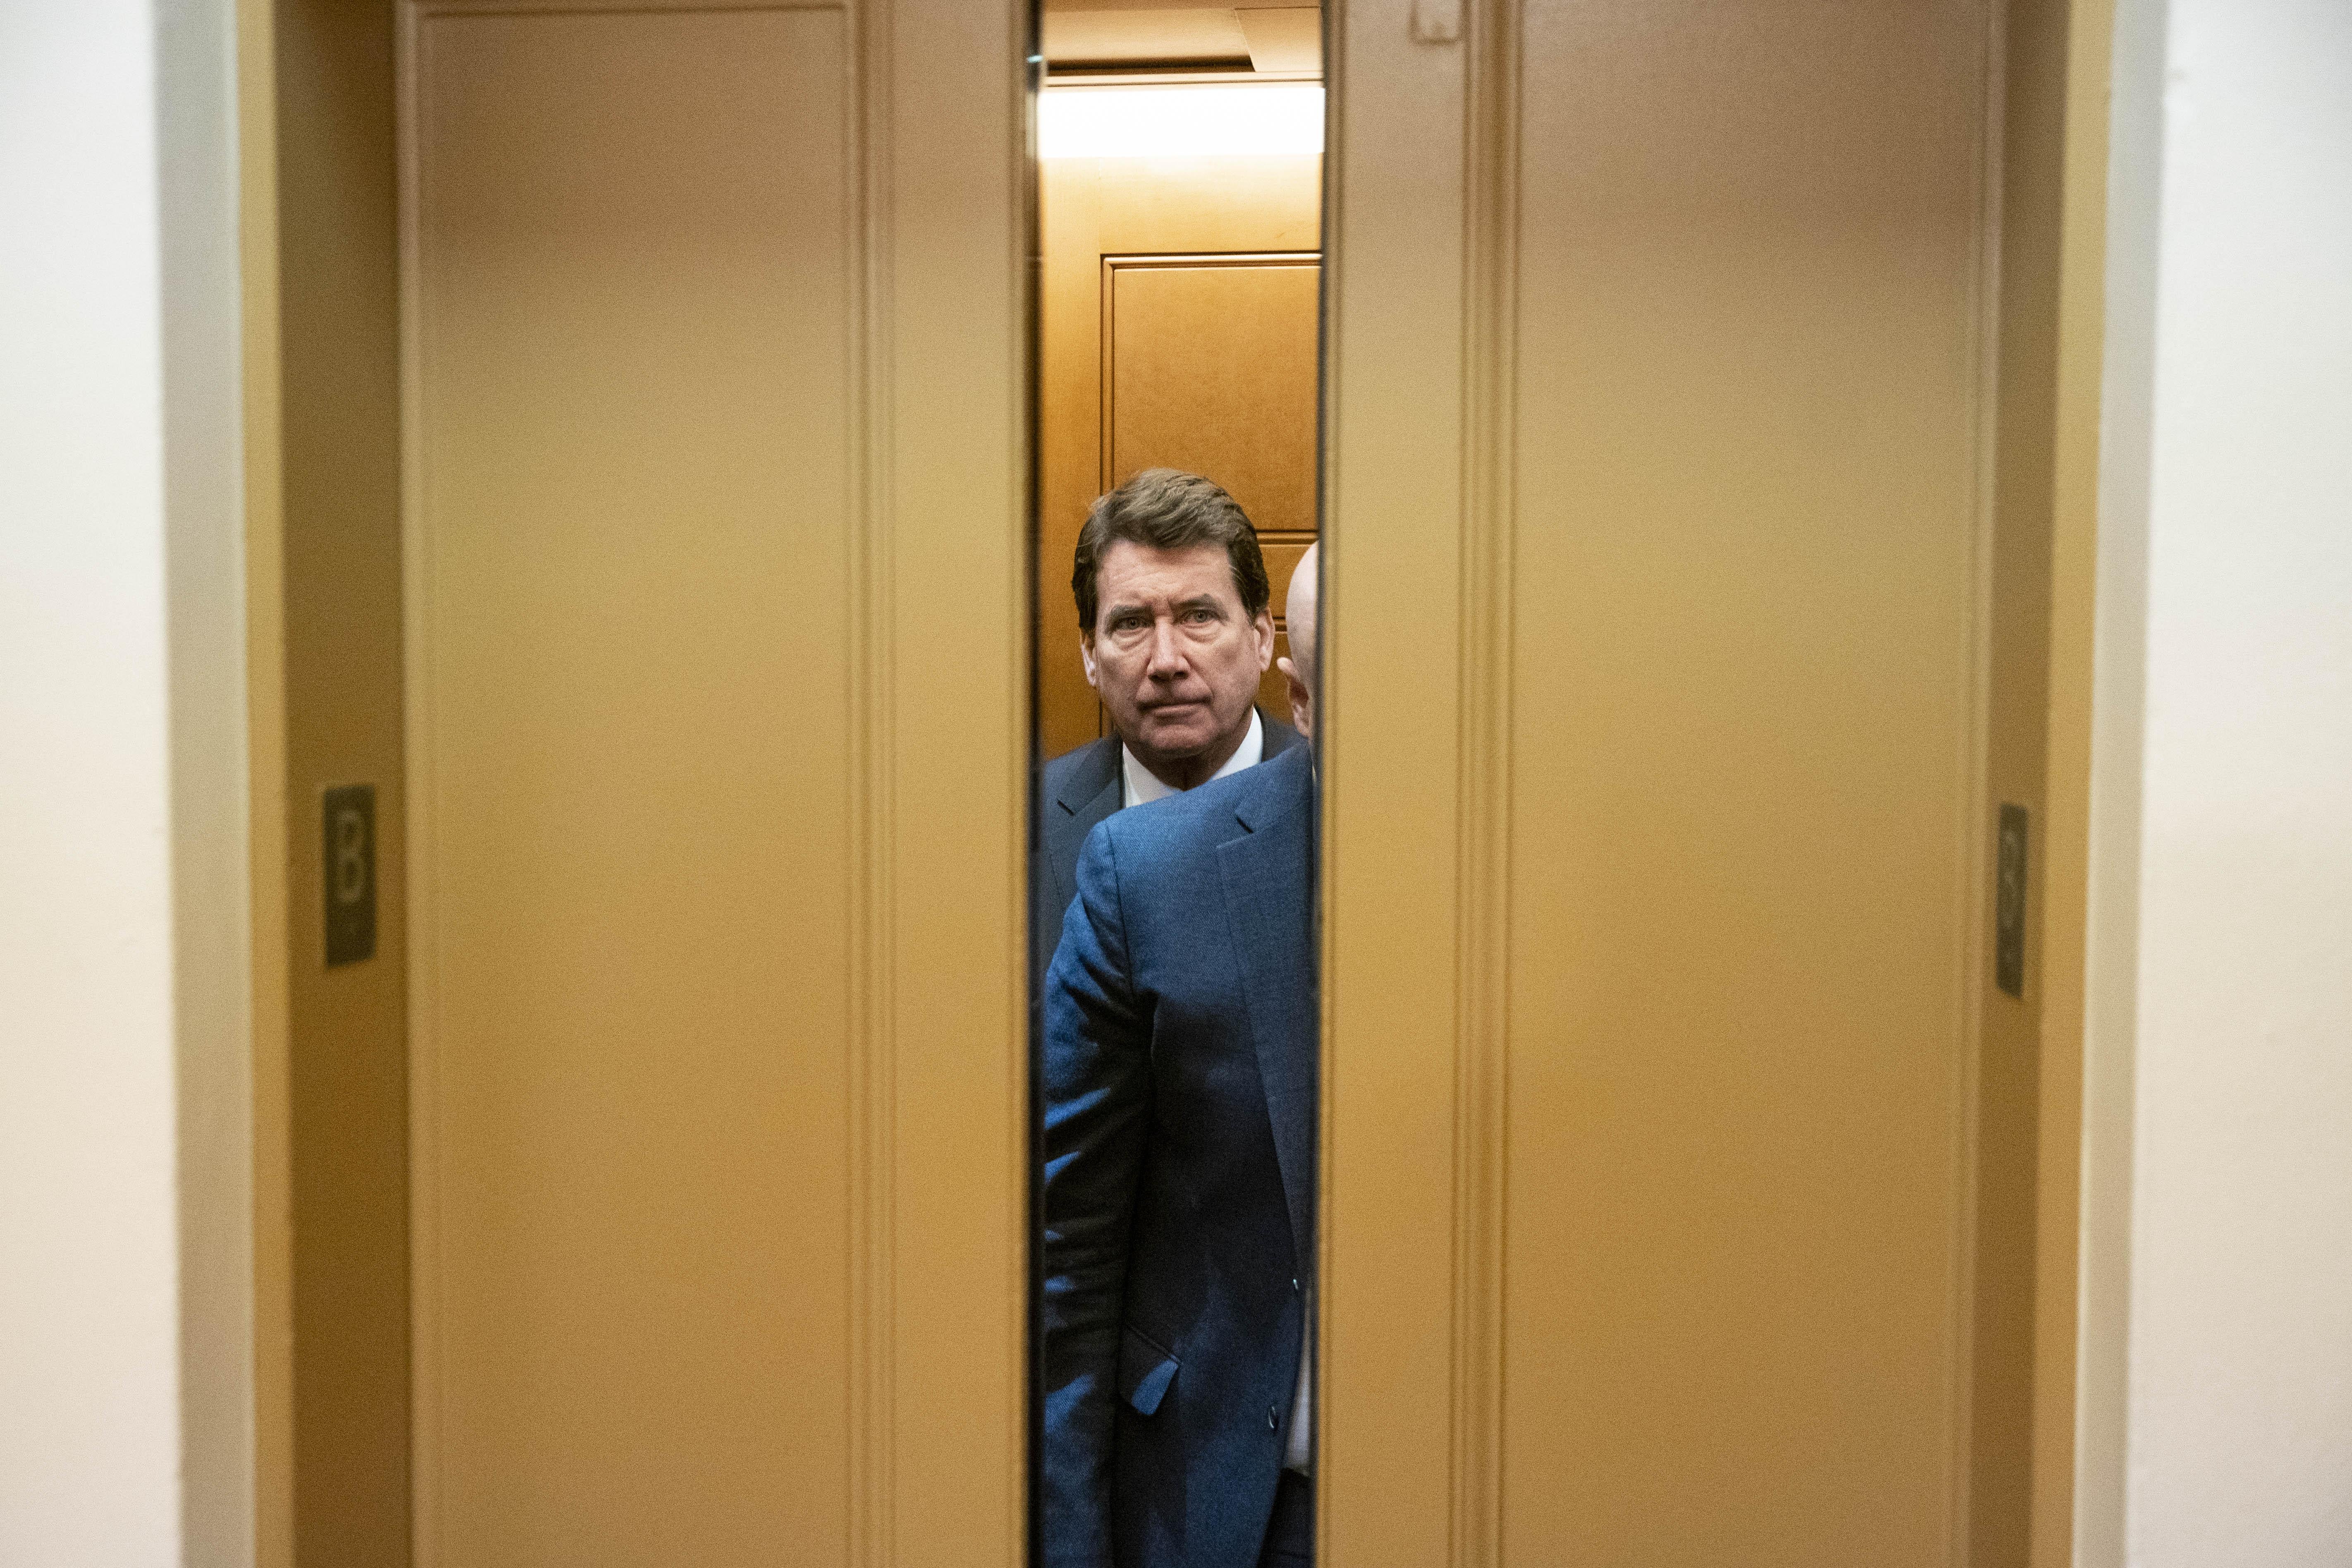 Sen. Bill Hagerty (R-TN) rides in an elevator from the Senate Subway to the Senate floor at the U.S. Capitol on August 7, 2021 in Washington, D.C. 